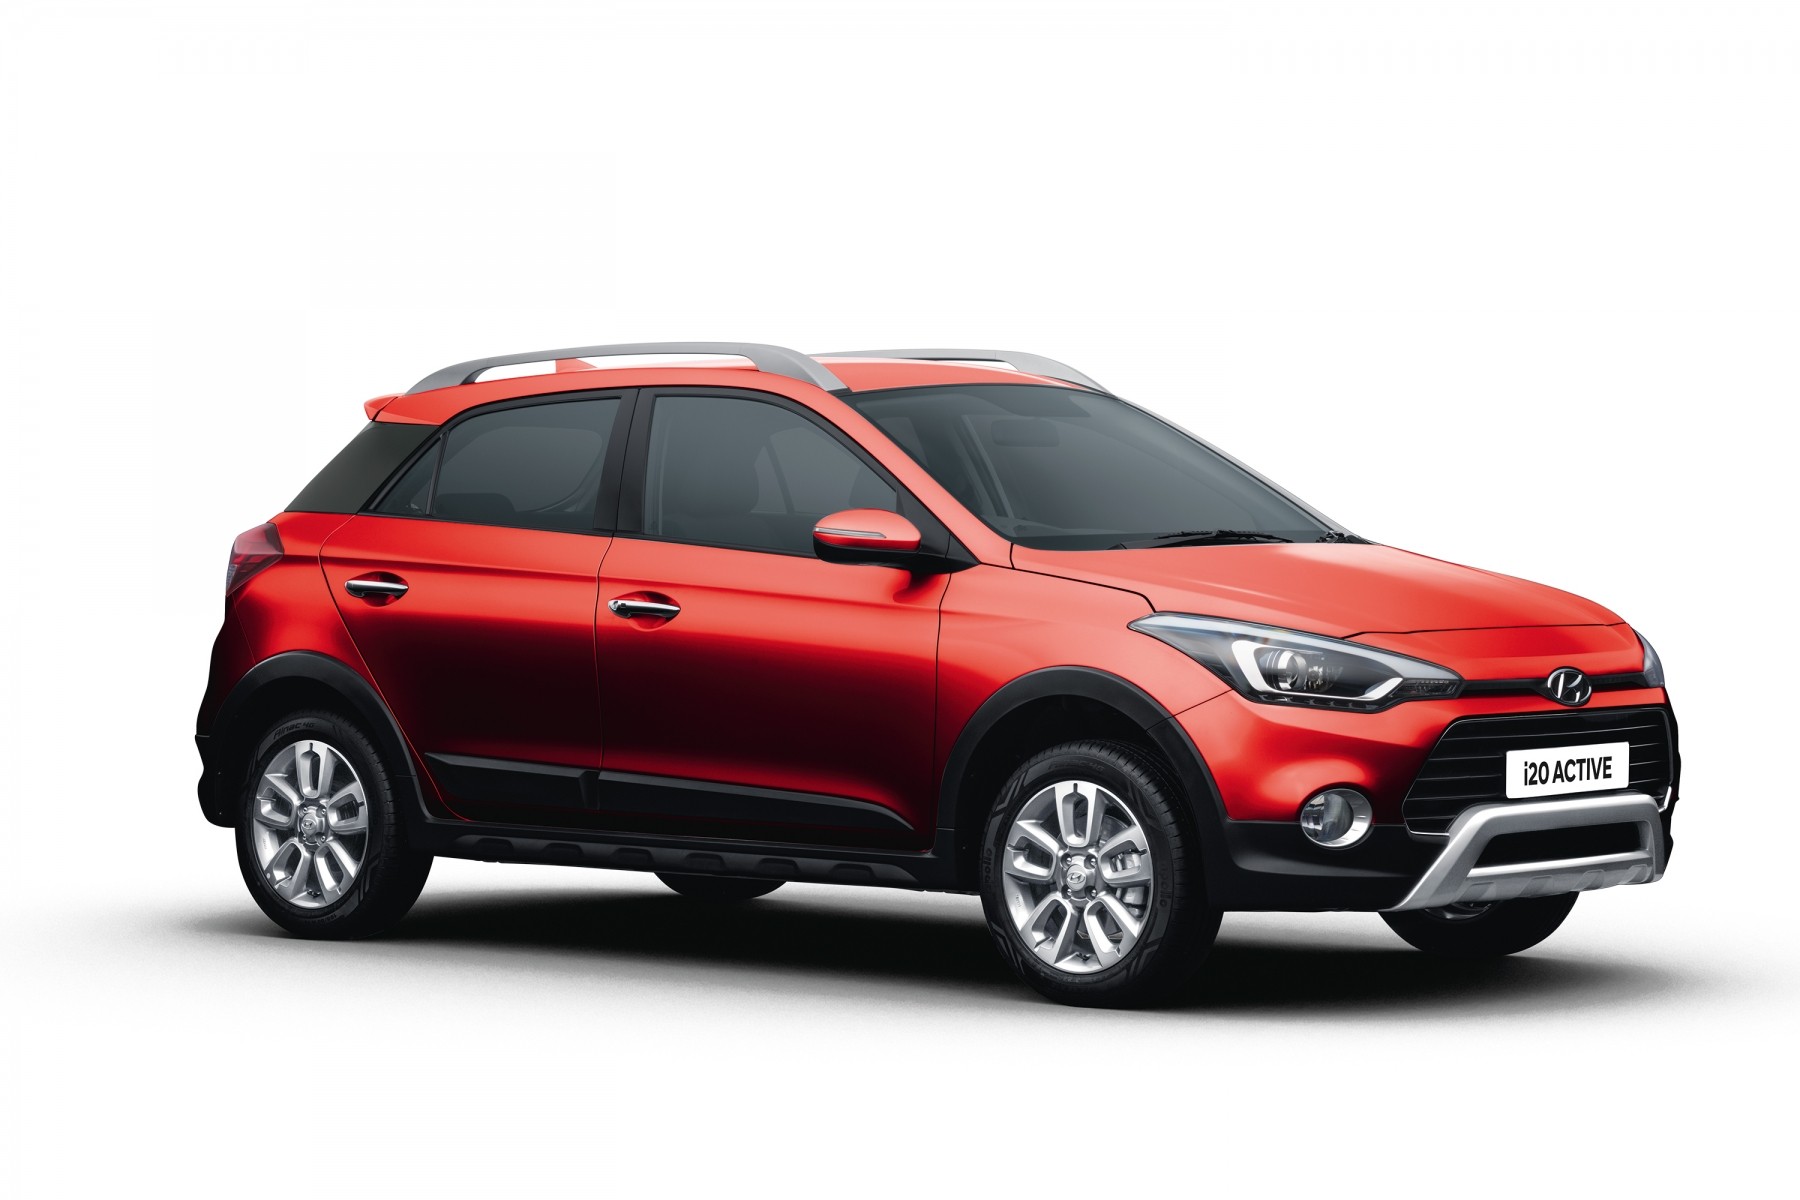 Hyundai launched the i20 Active facelift 2018